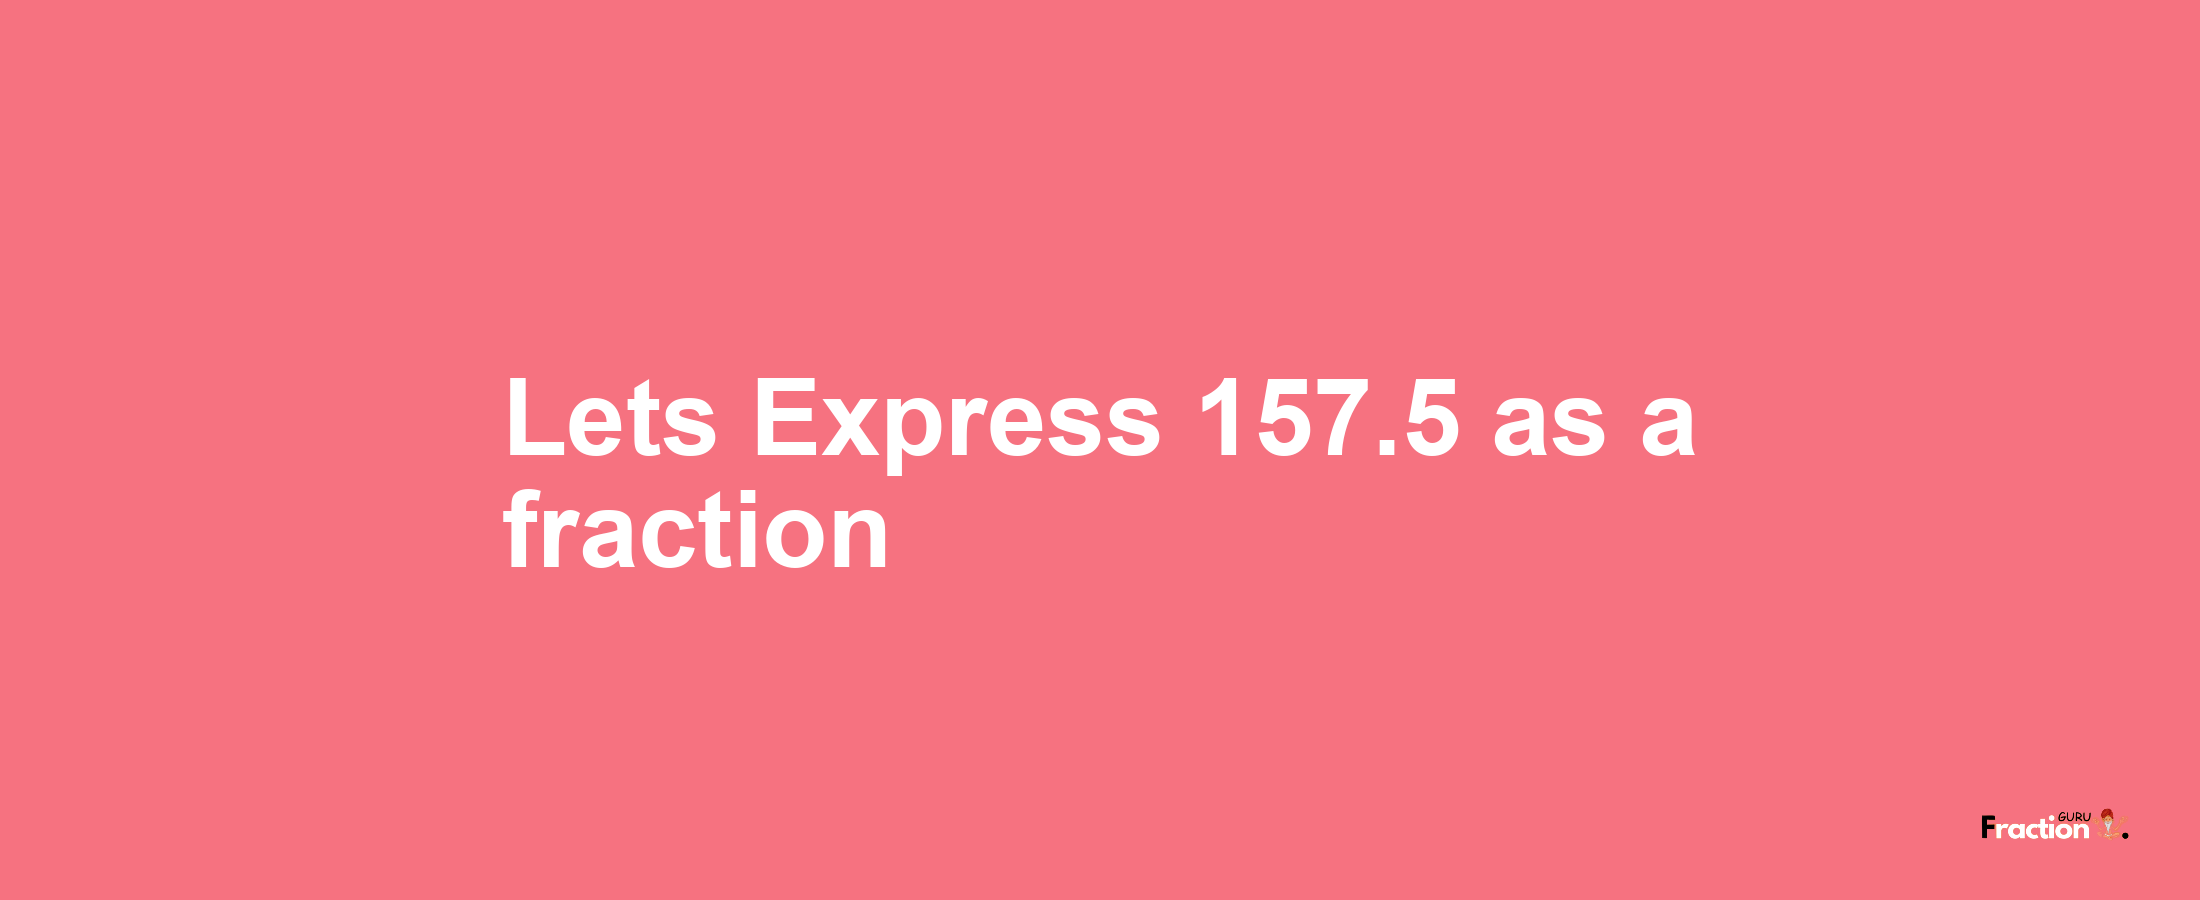 Lets Express 157.5 as afraction